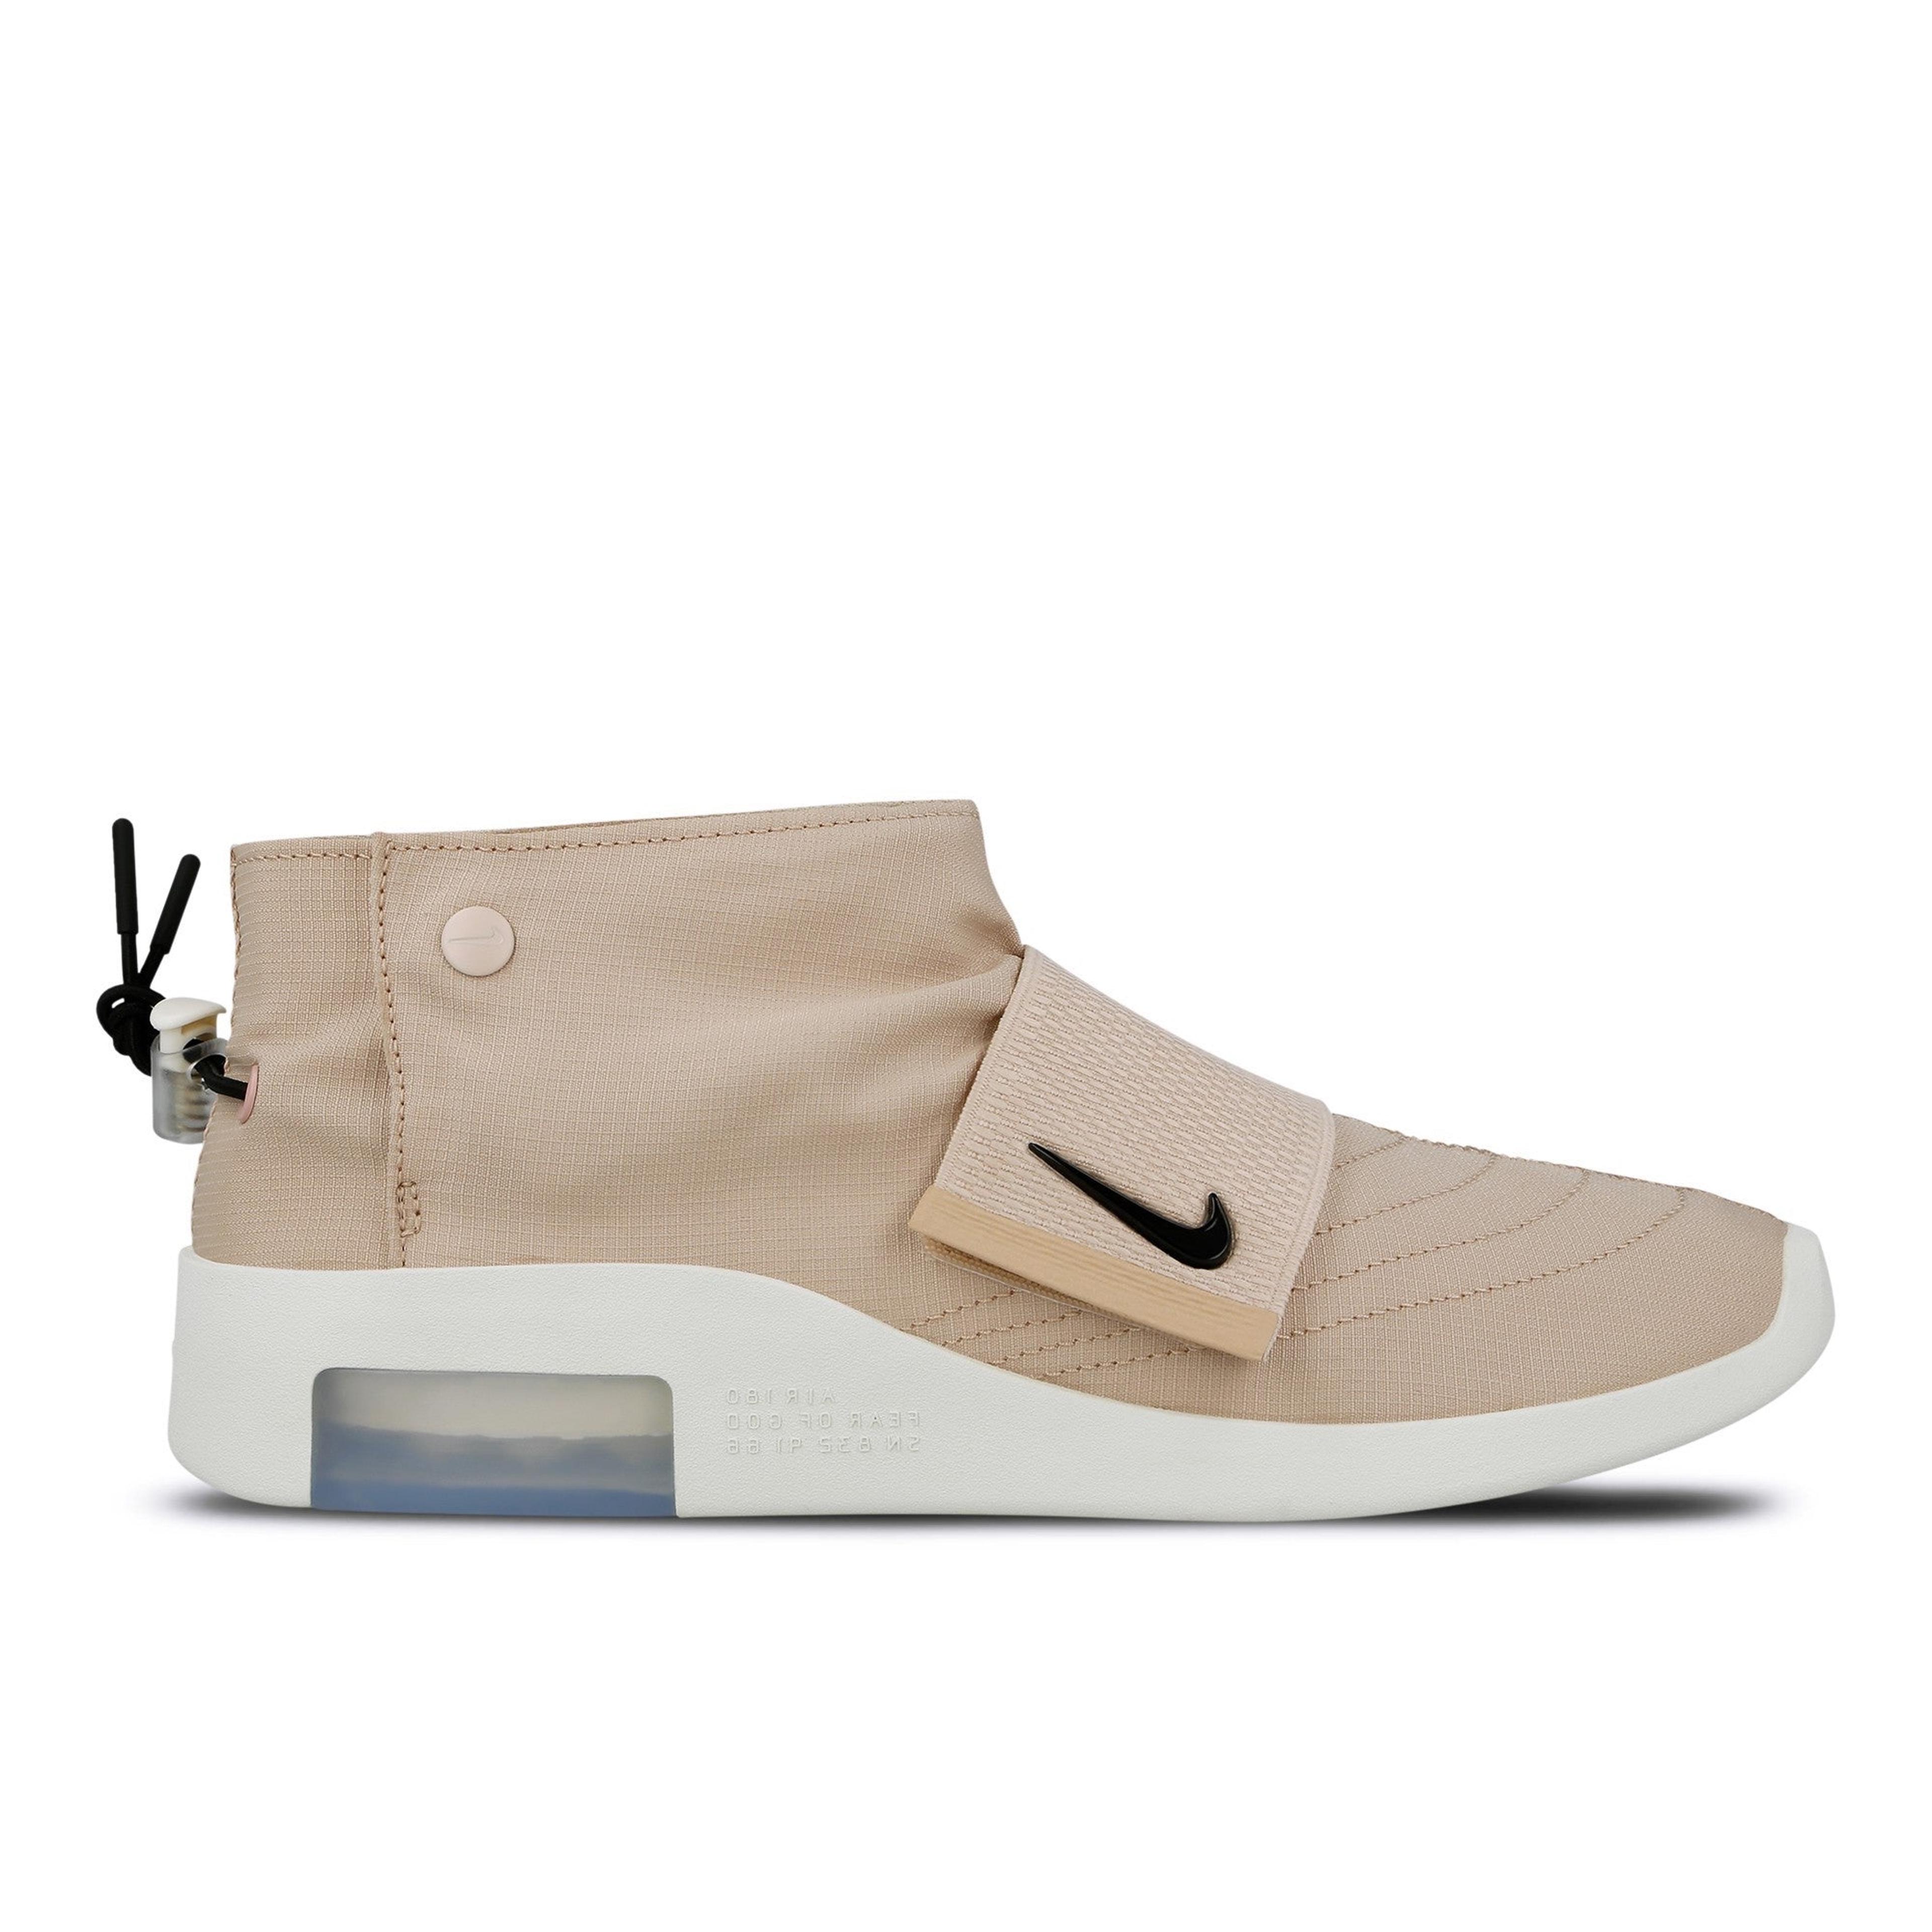 Alternate View 1 of Men's Nike Air X Fear Of God MOC "Particle Beige" AT8086 200